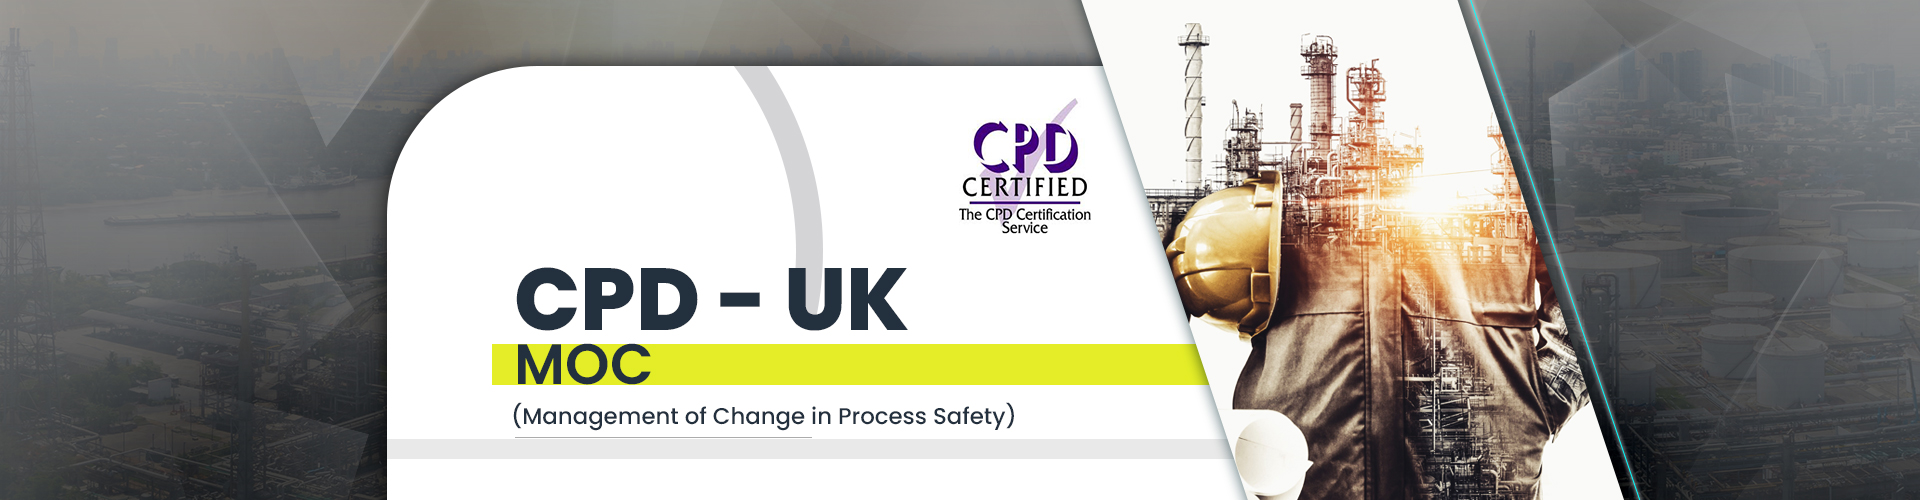 MOC – Management of Change in Process Safety